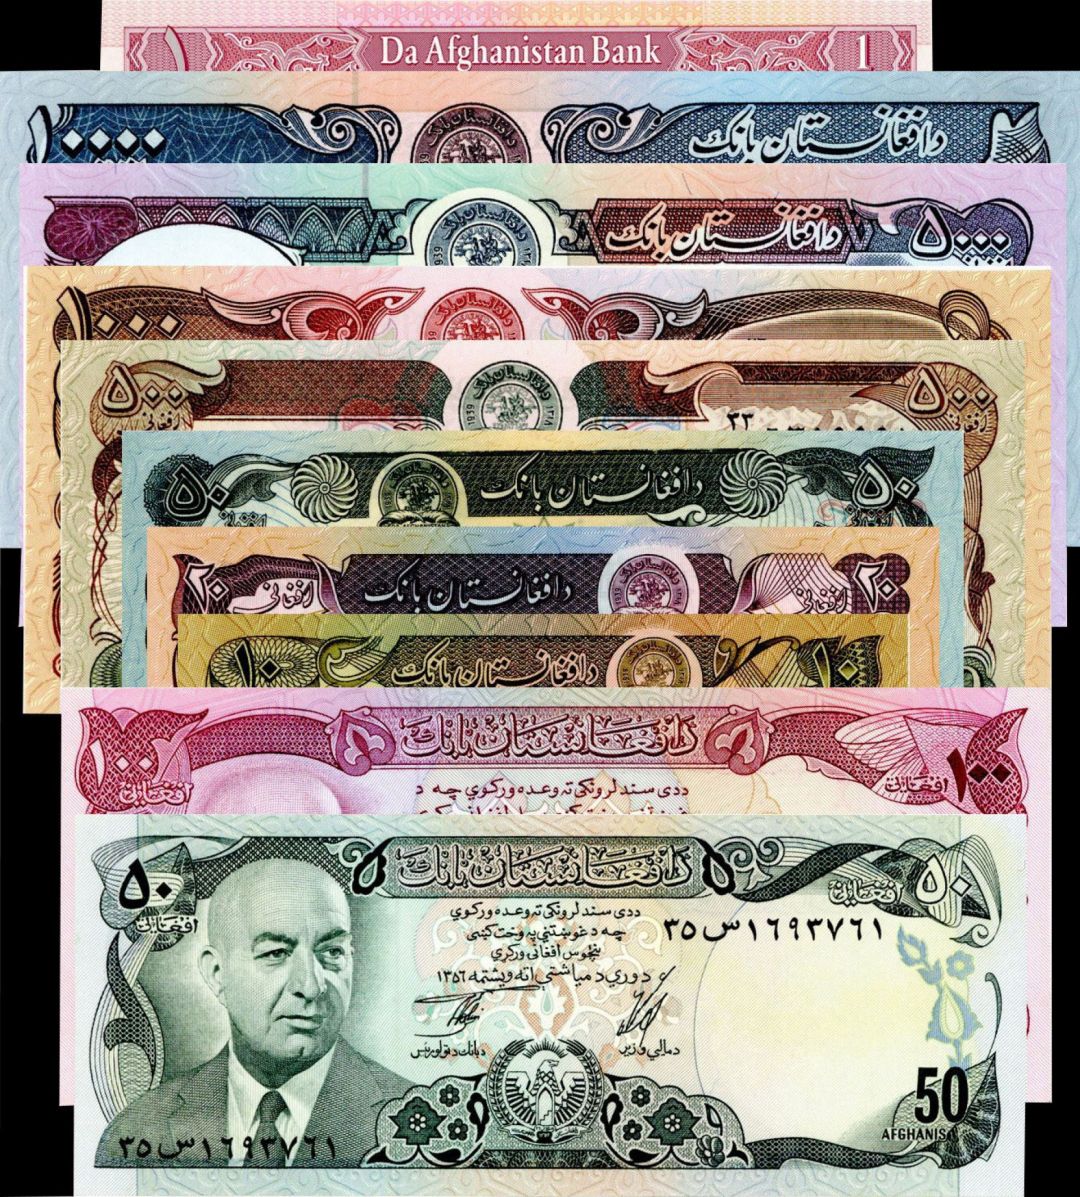 Set of 10 Notes - Afghanistan - P-49, 50, 55, 56, 57b, 60c, 61c, 62, 63a, and 64 - Group of 10 Foreign Paper Money Notes